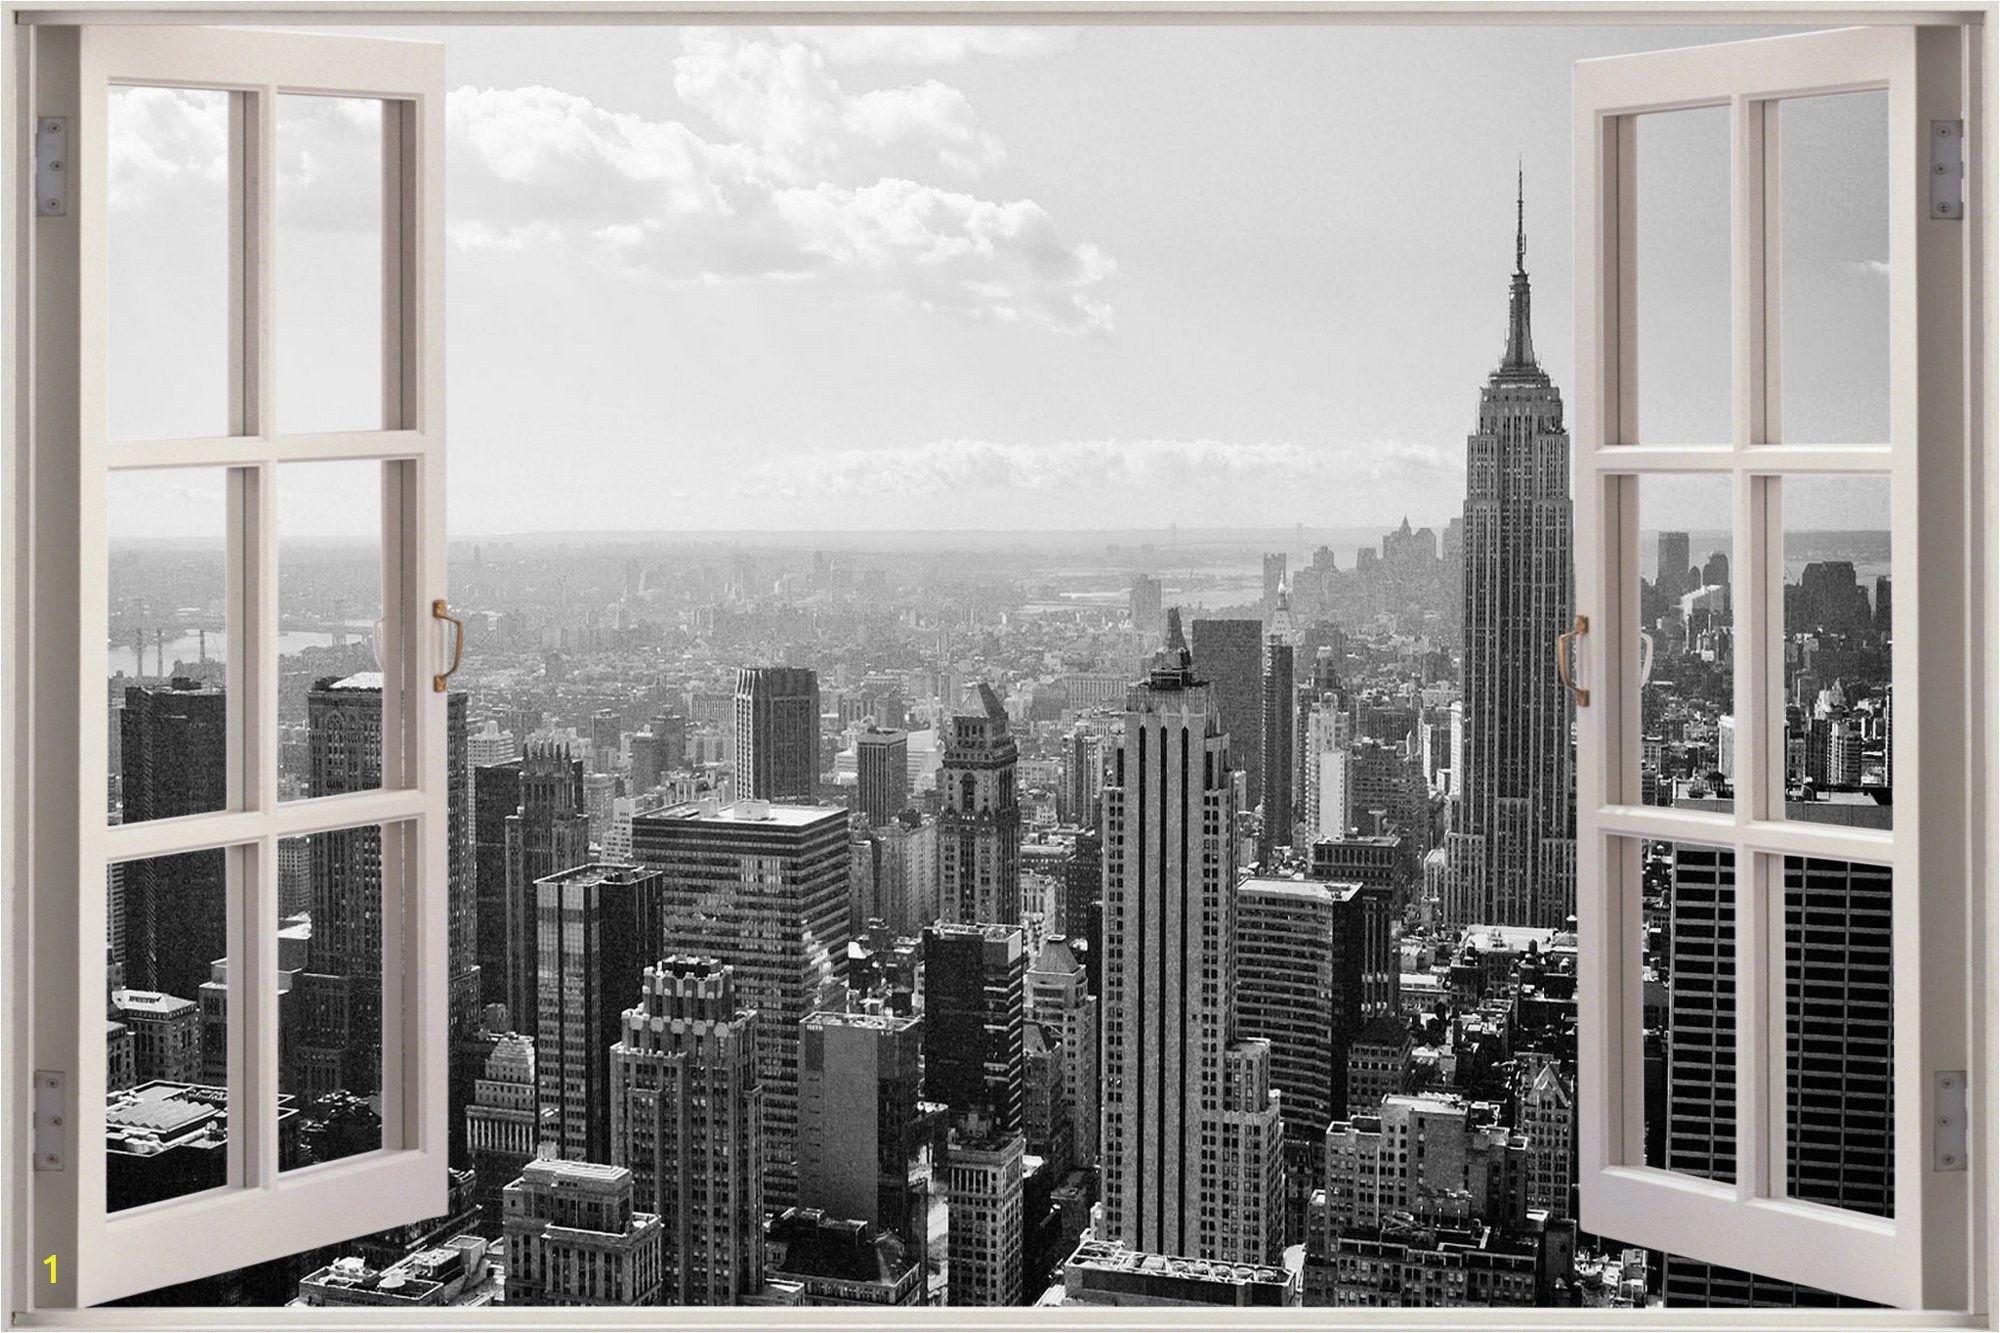 Black and White Nyc Wall Mural Huge 3d Window New York City View Wall Stickers Mural